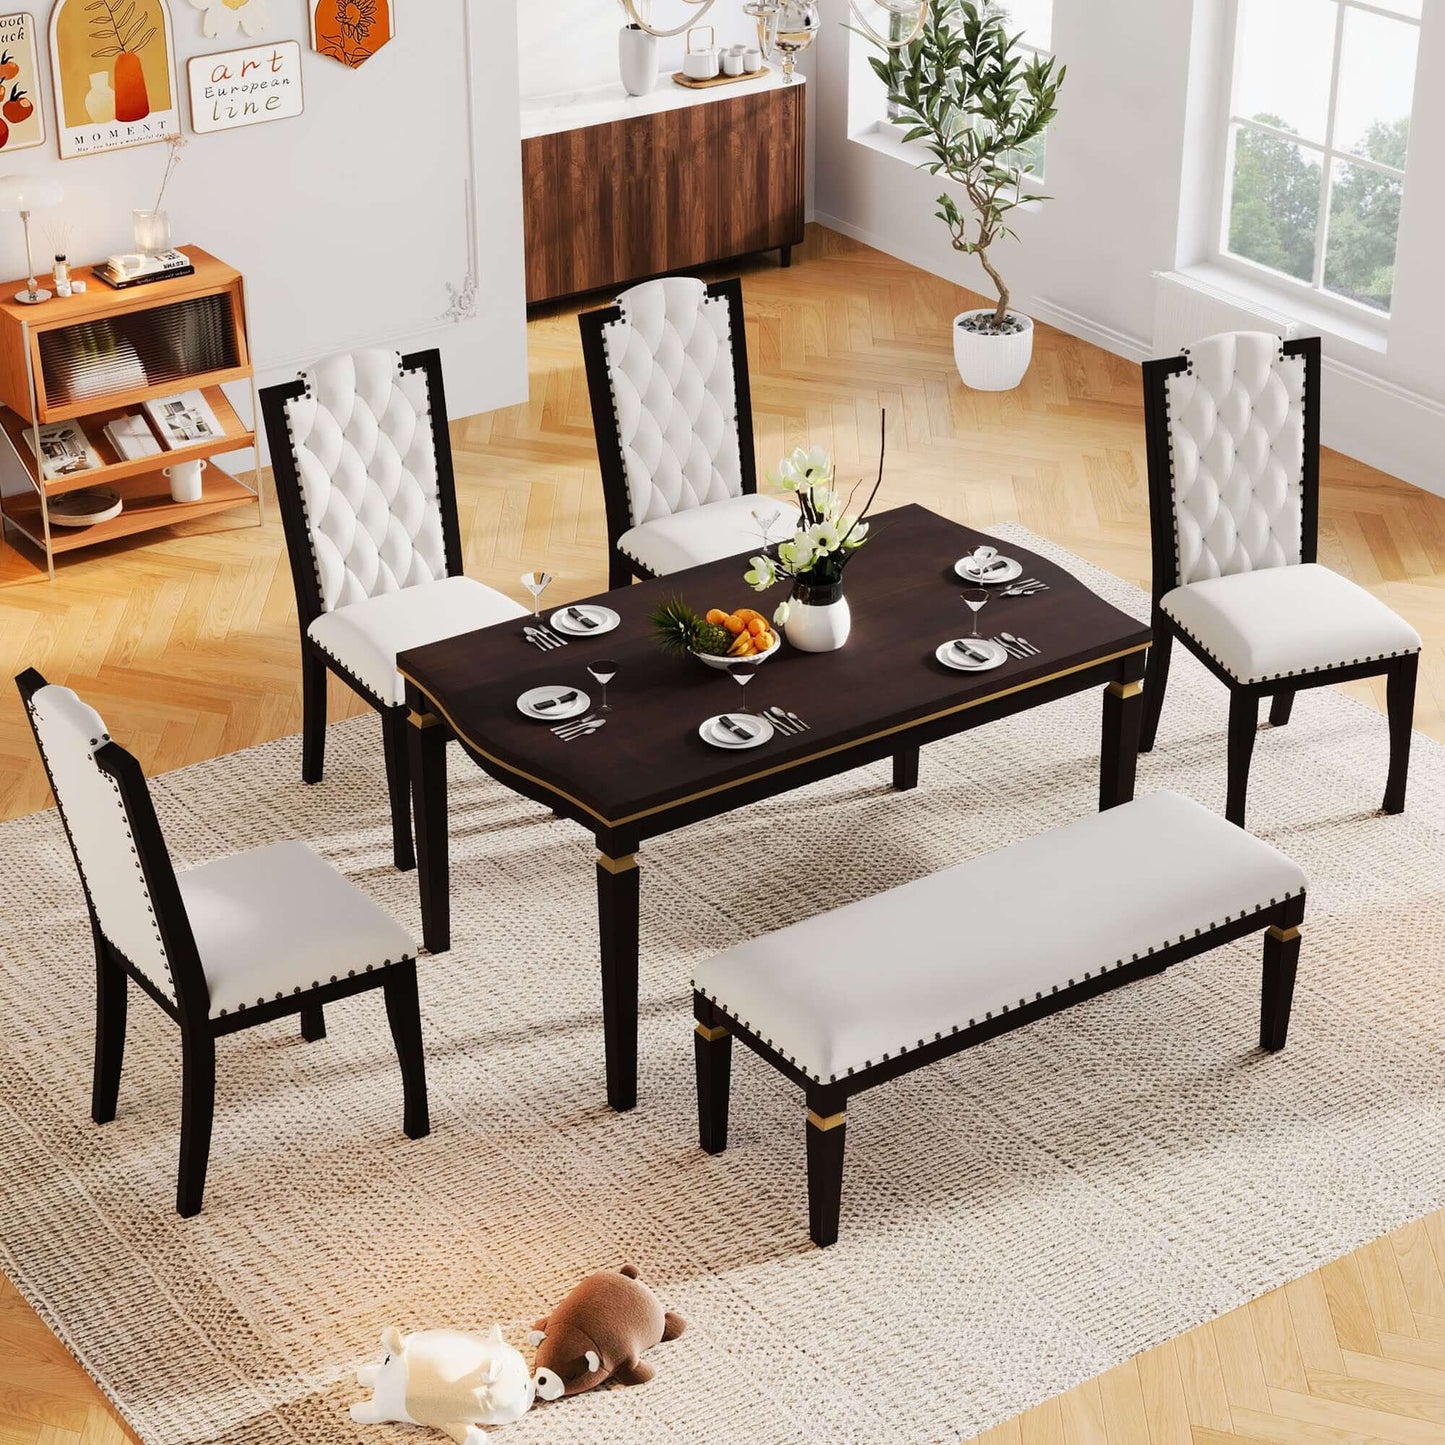 6-Piece Kitchen Dining Table Set with 62.7" Rectangular Table, 4 High-Back Tufted Chairs, and 1 Bench in Espresso Finish in Stylish Dining Room